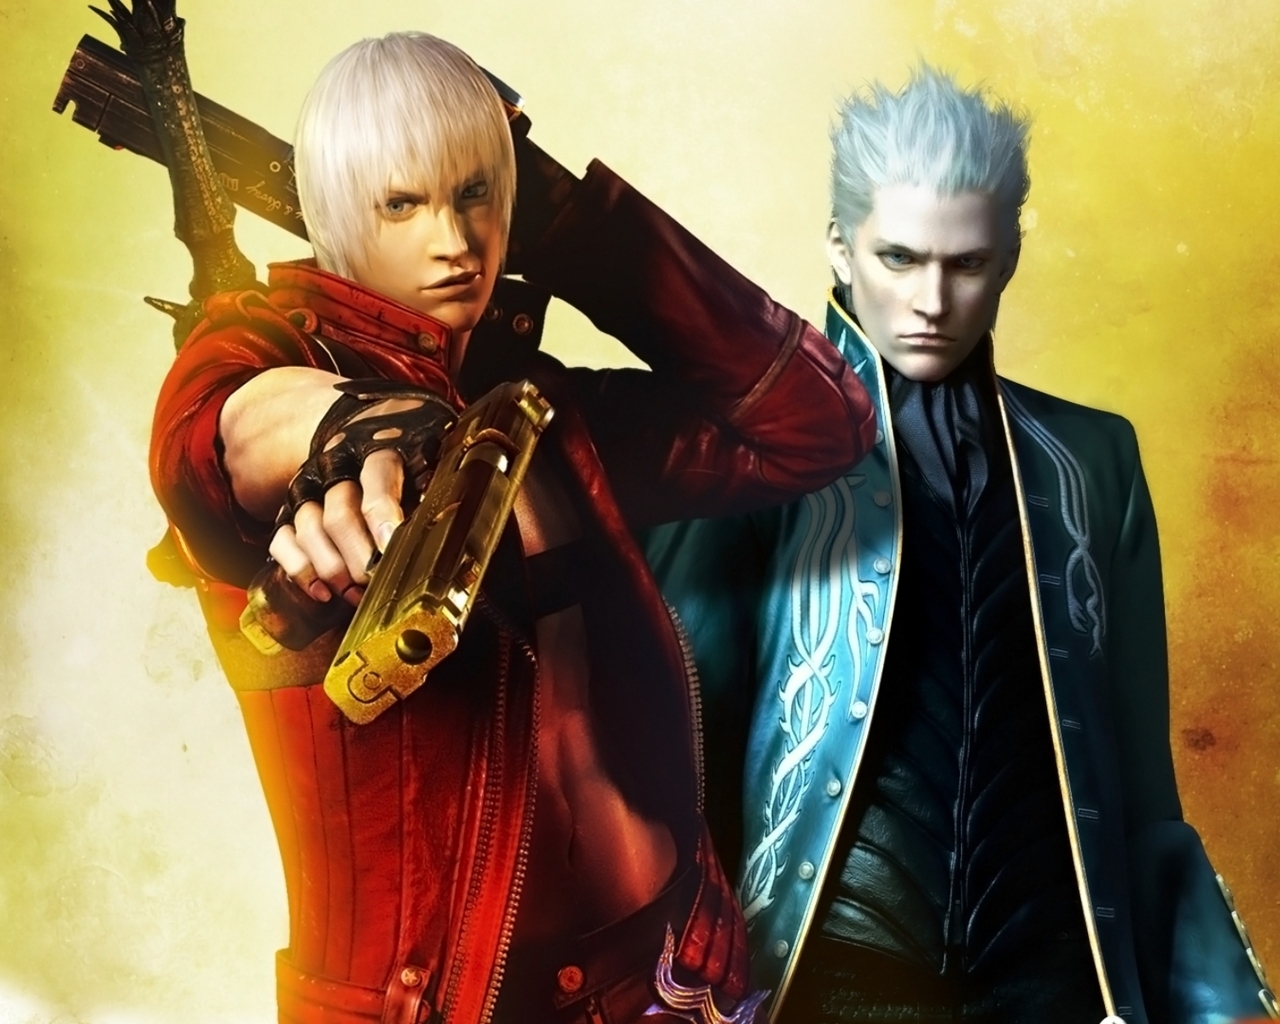 Devil may cry 3 for 1280 x 1024 resolution